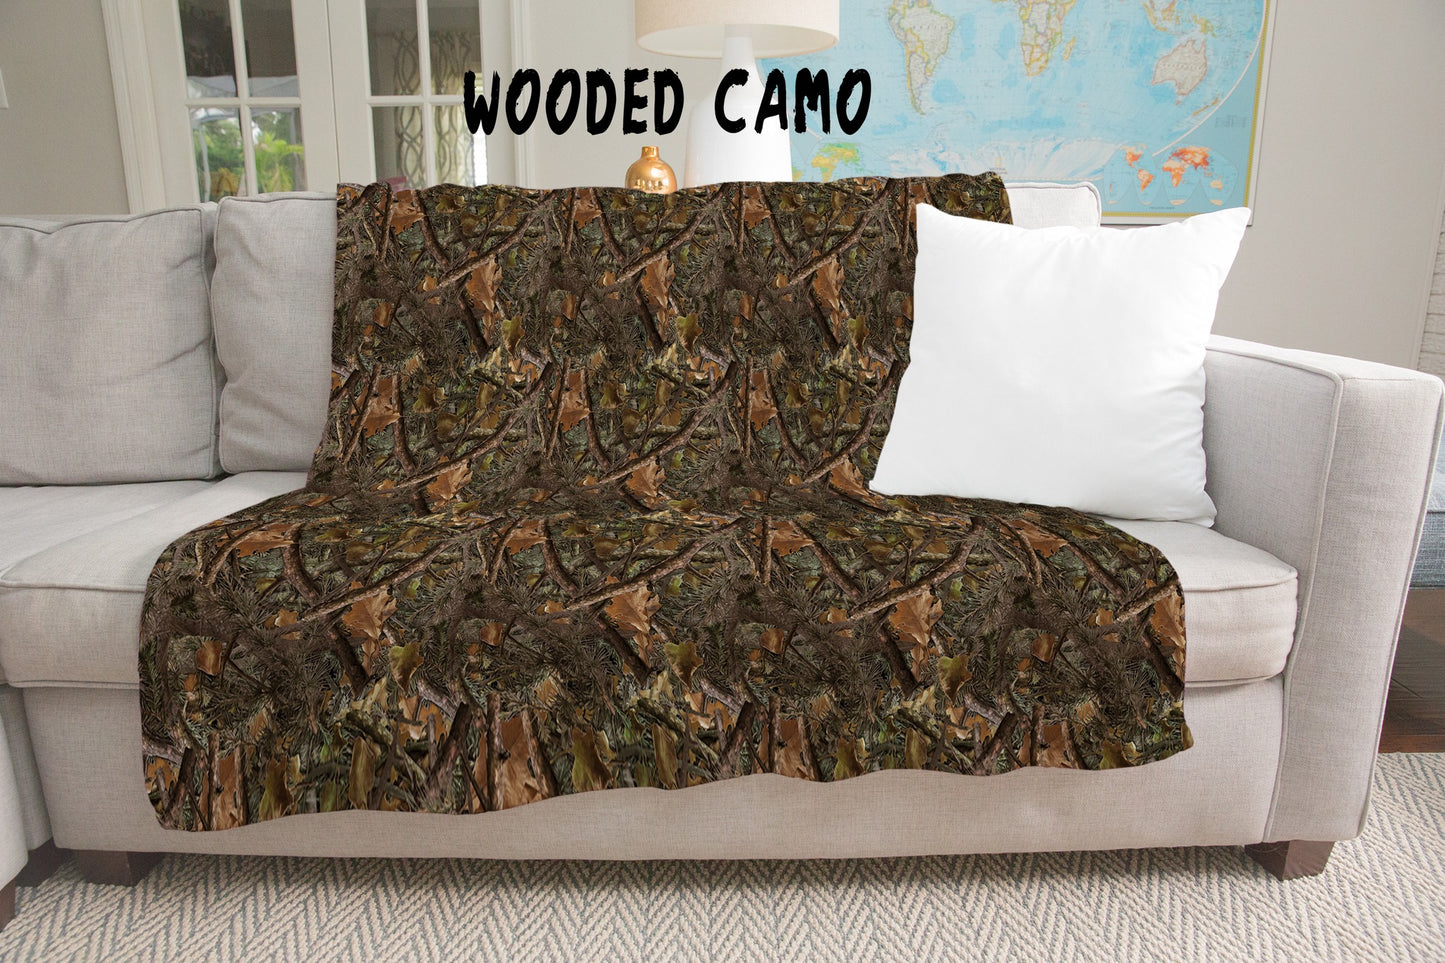 WOODED CAMO- GIANT SHAREABLE THROW BLANKETS